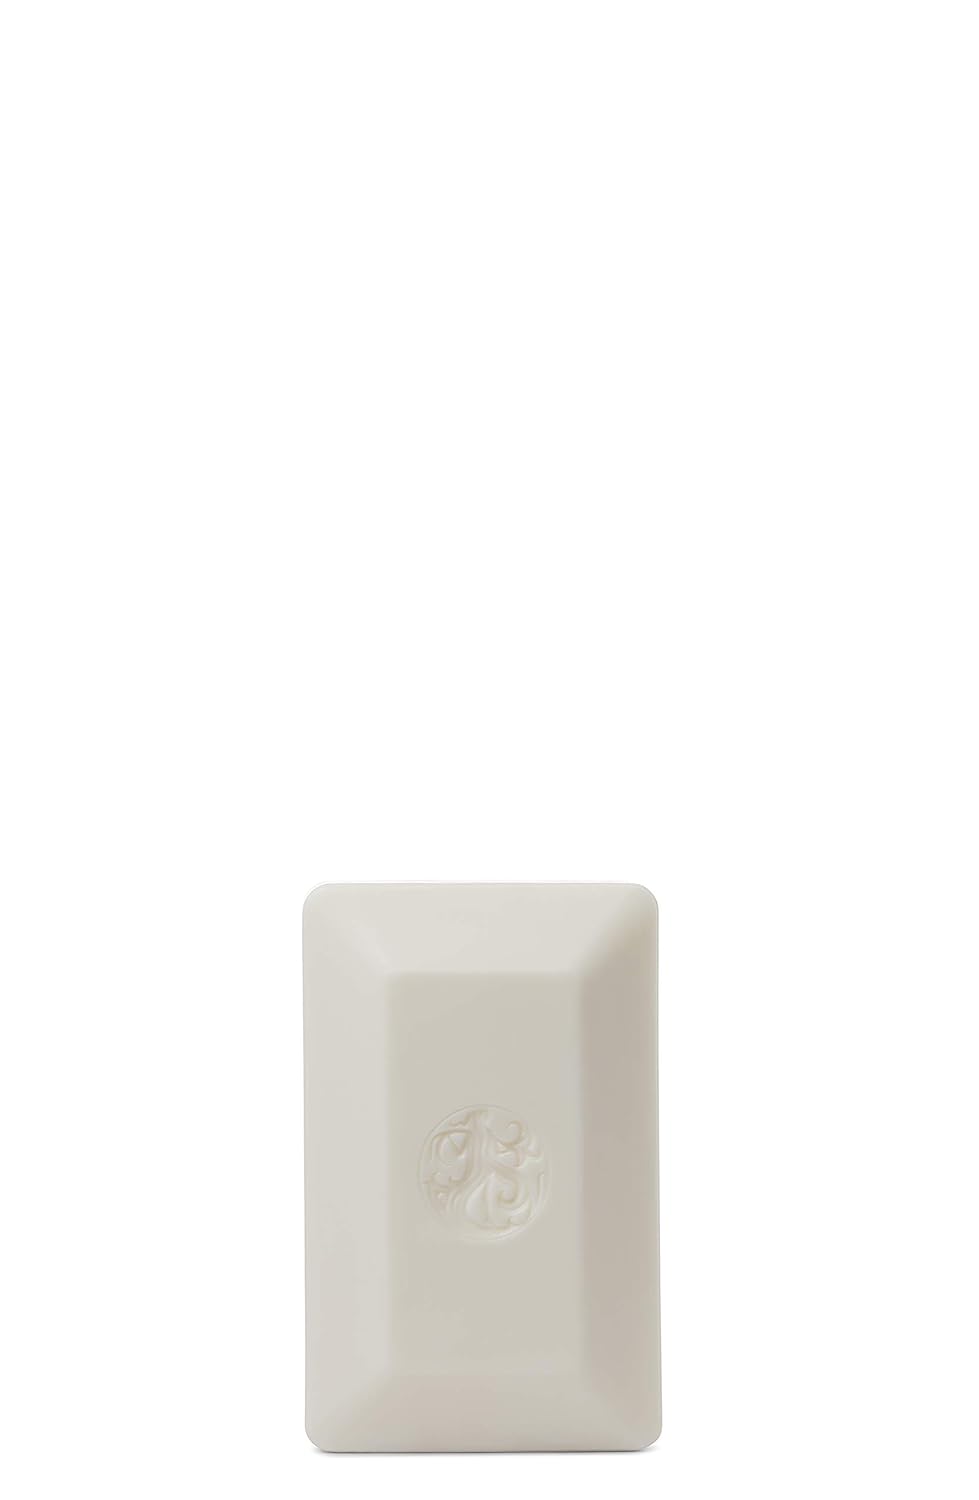 Oribe Cote d'Azur Bar Soap , 7 Ounce (Pack of 1)